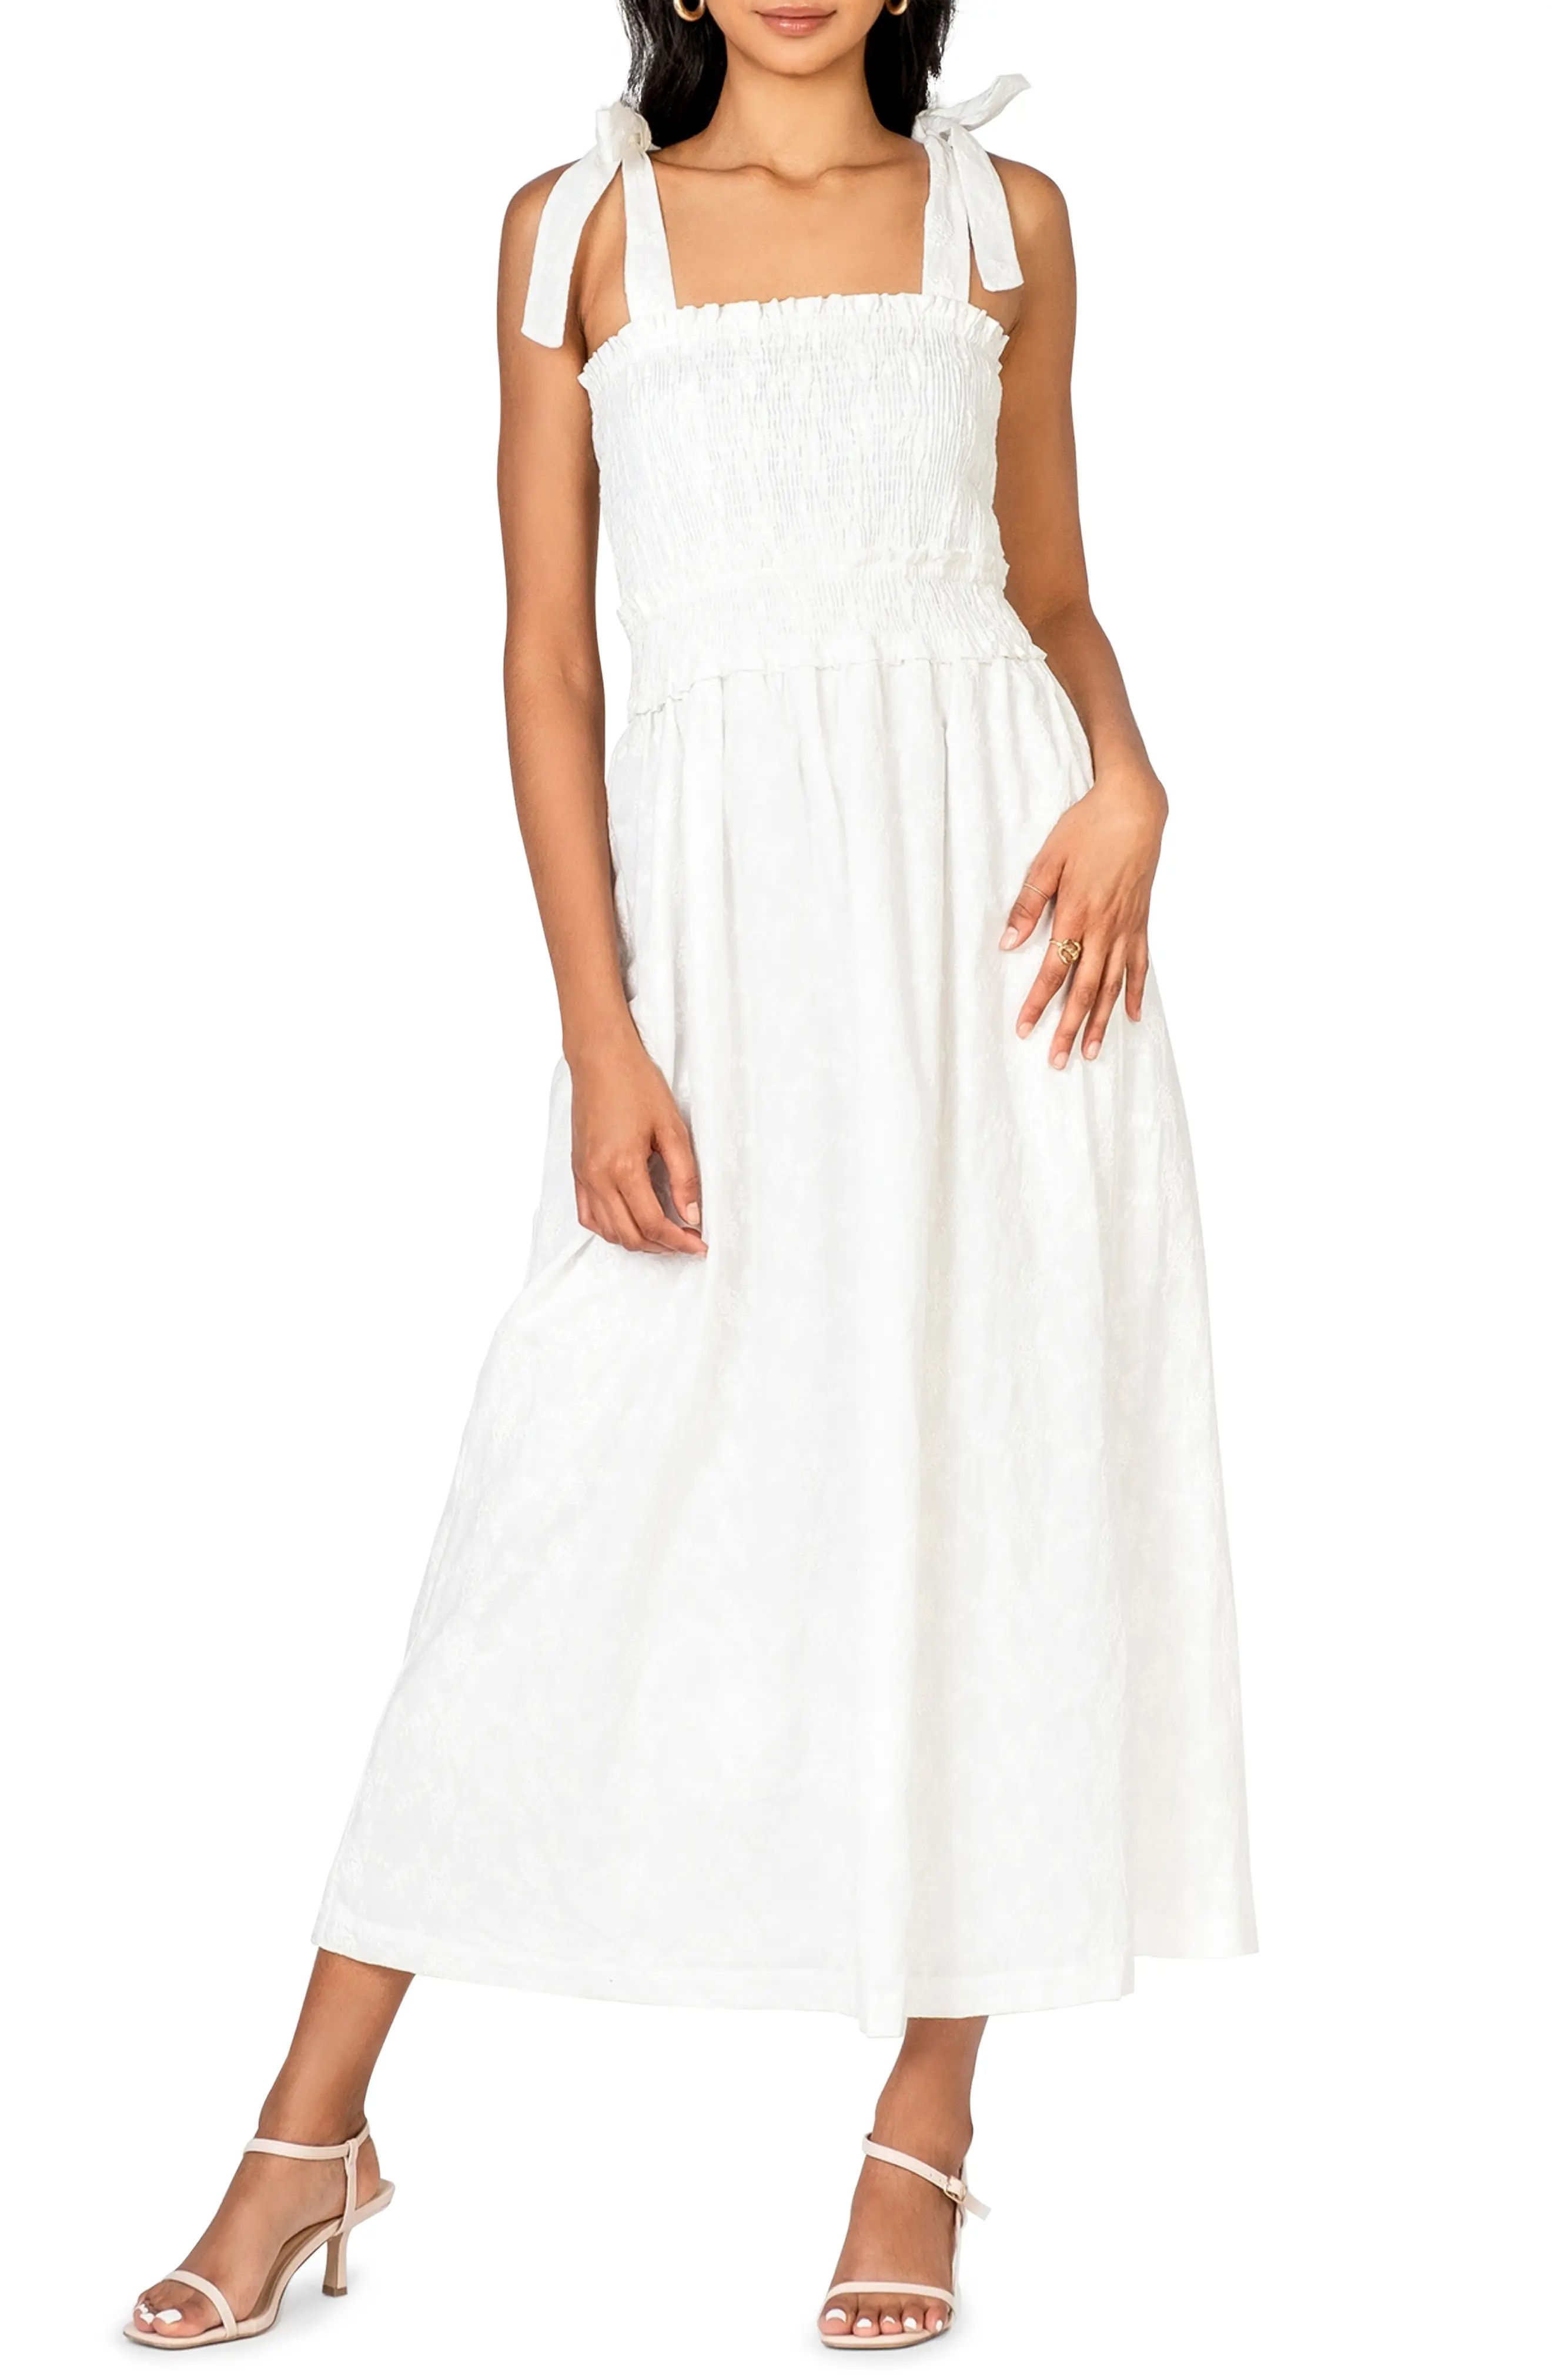 Lost + Wander Angel in Disguise Smocked Tie Strap Dress, Size Small in White at Nordstrom | Nordstrom